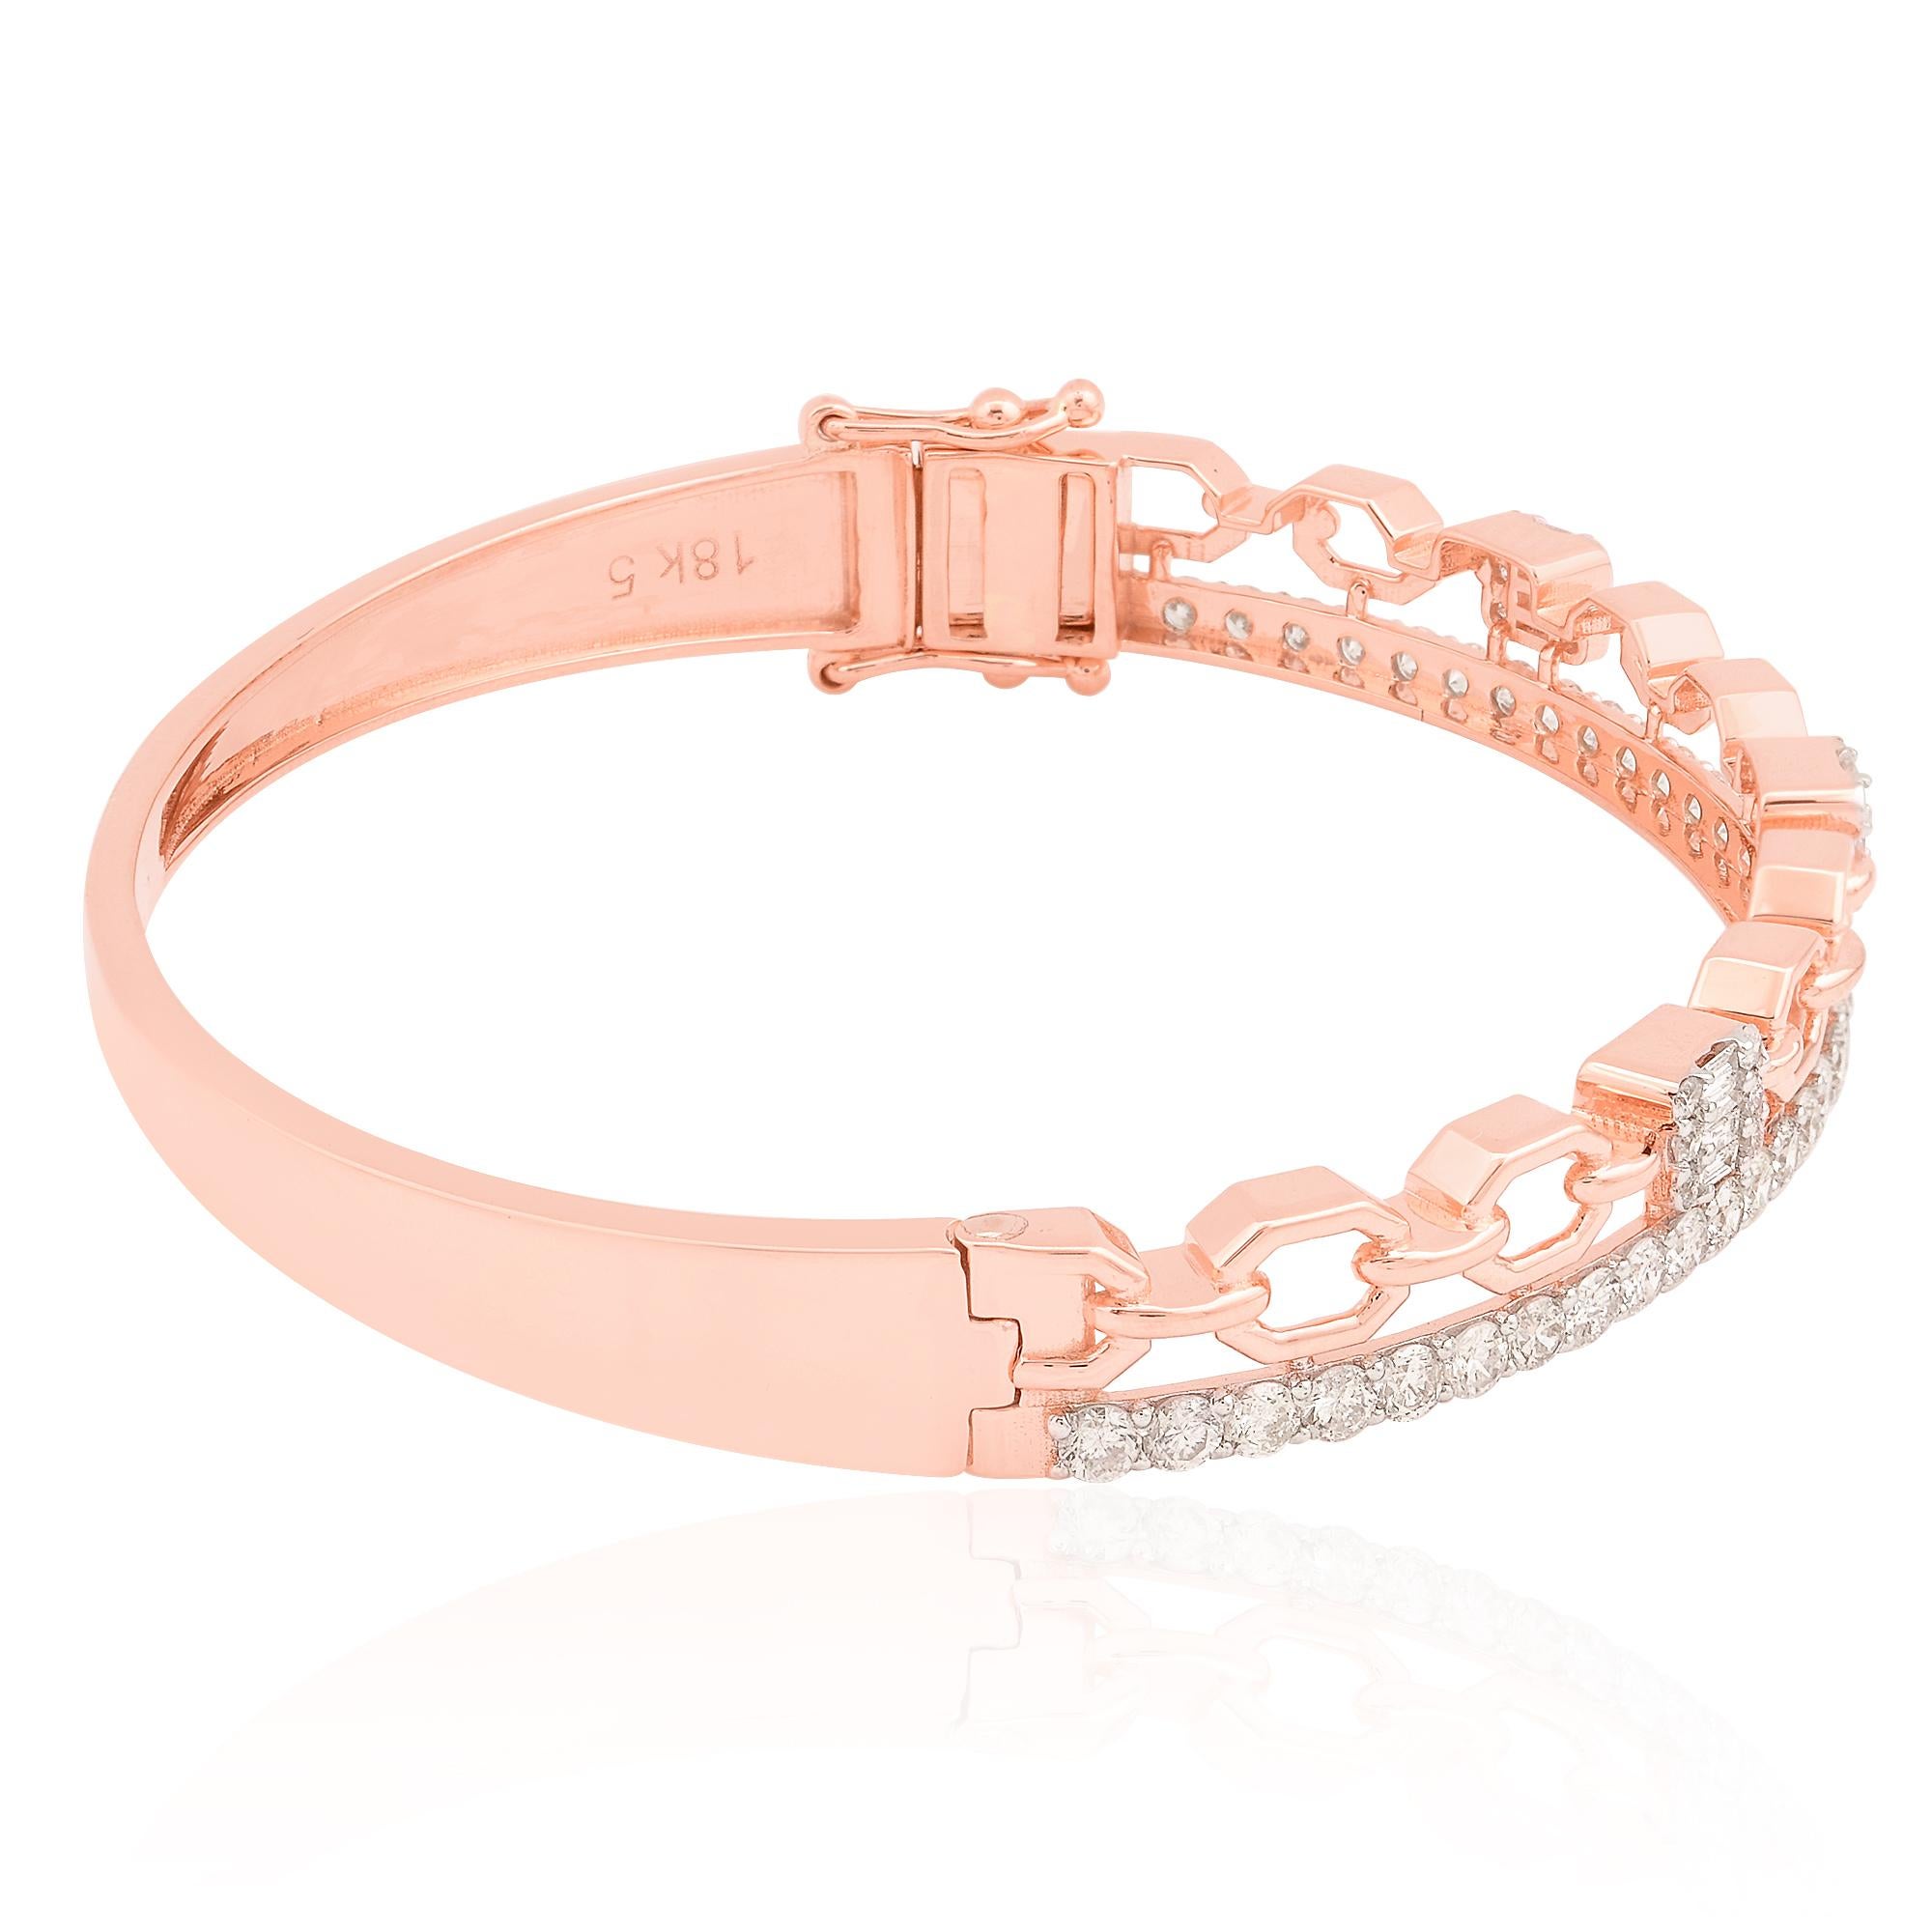 Crafted in luxurious 14 Karat Rose Gold, the bangle exudes warmth and sophistication, complementing the diamonds with its soft blush hue. The rose gold setting adds a contemporary twist to the design, infusing it with a romantic and feminine